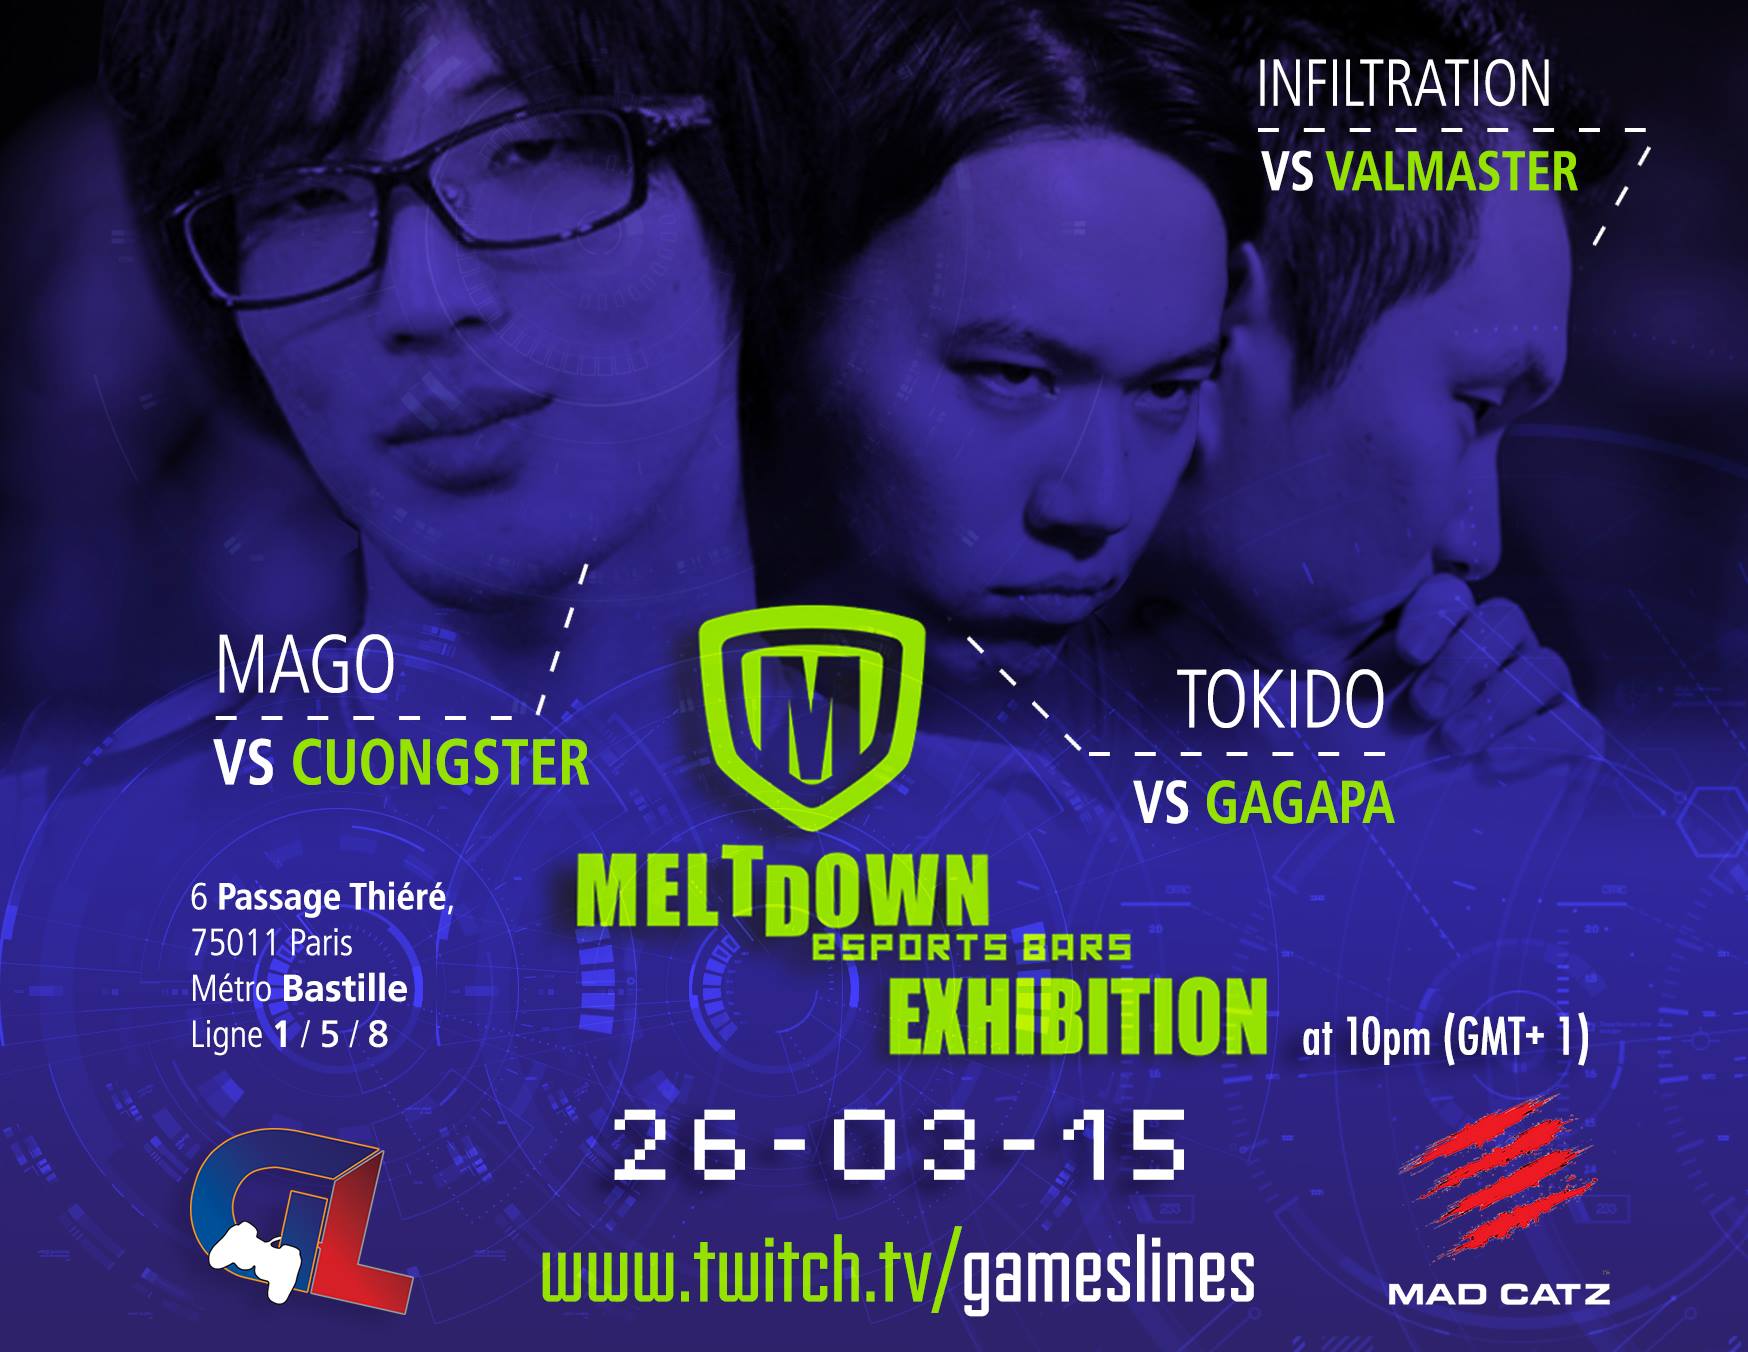 #Tokido streaming now #USF4 #Italy #IGT2015 Attendees #KOF #DOA #GGXRD